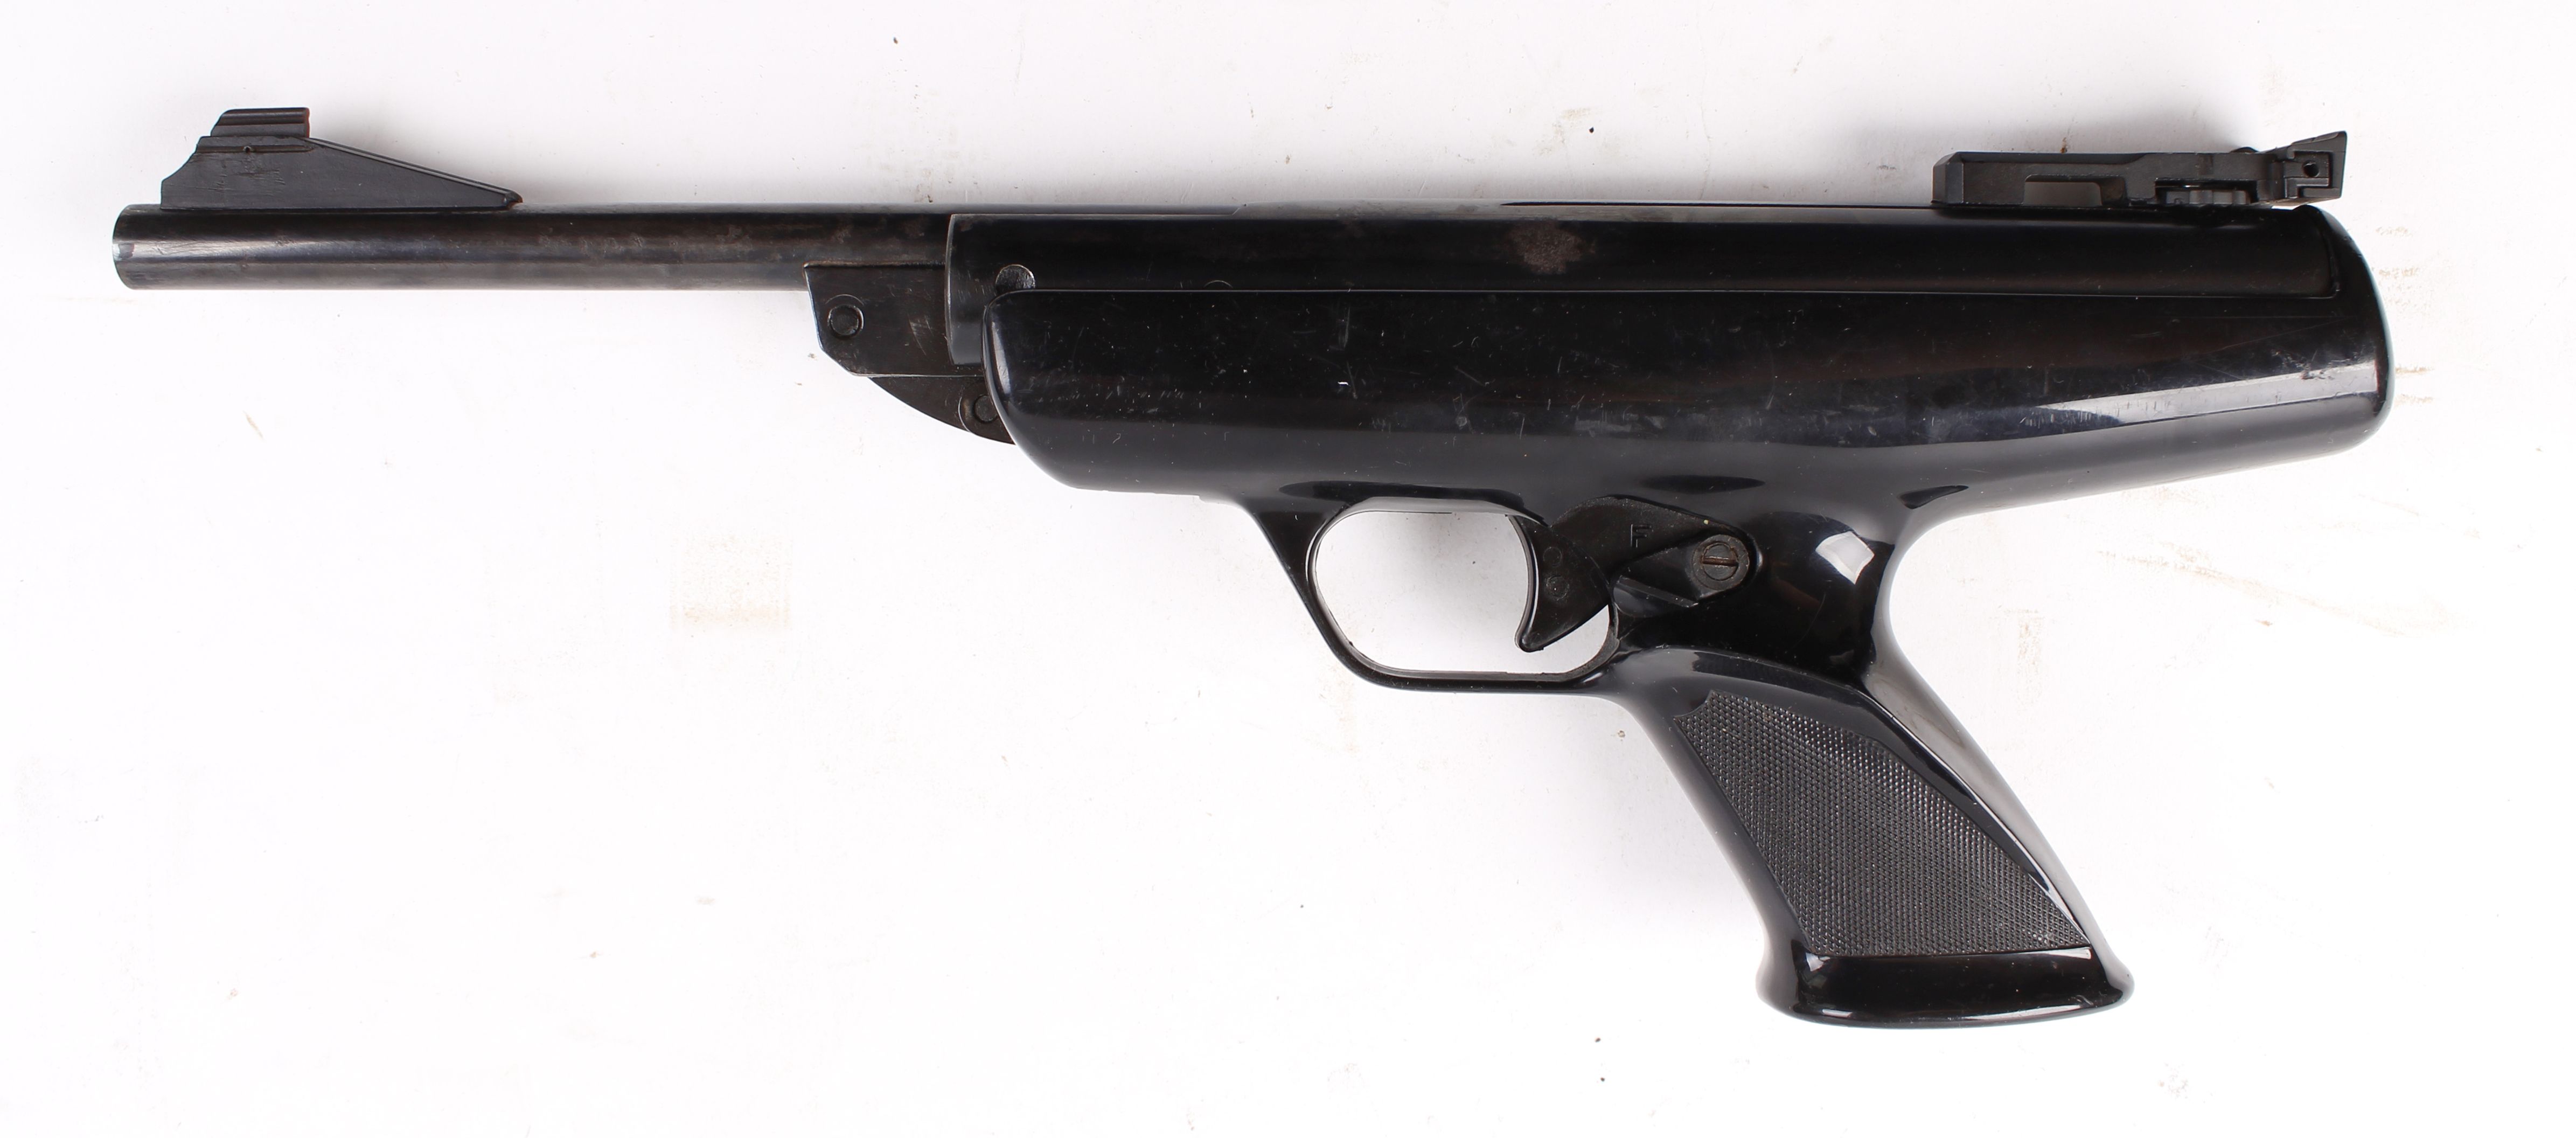 .177 BSA Scorpion break barrel air pistol, open sights, no. PA 12425 Purchasers Note: This Lot